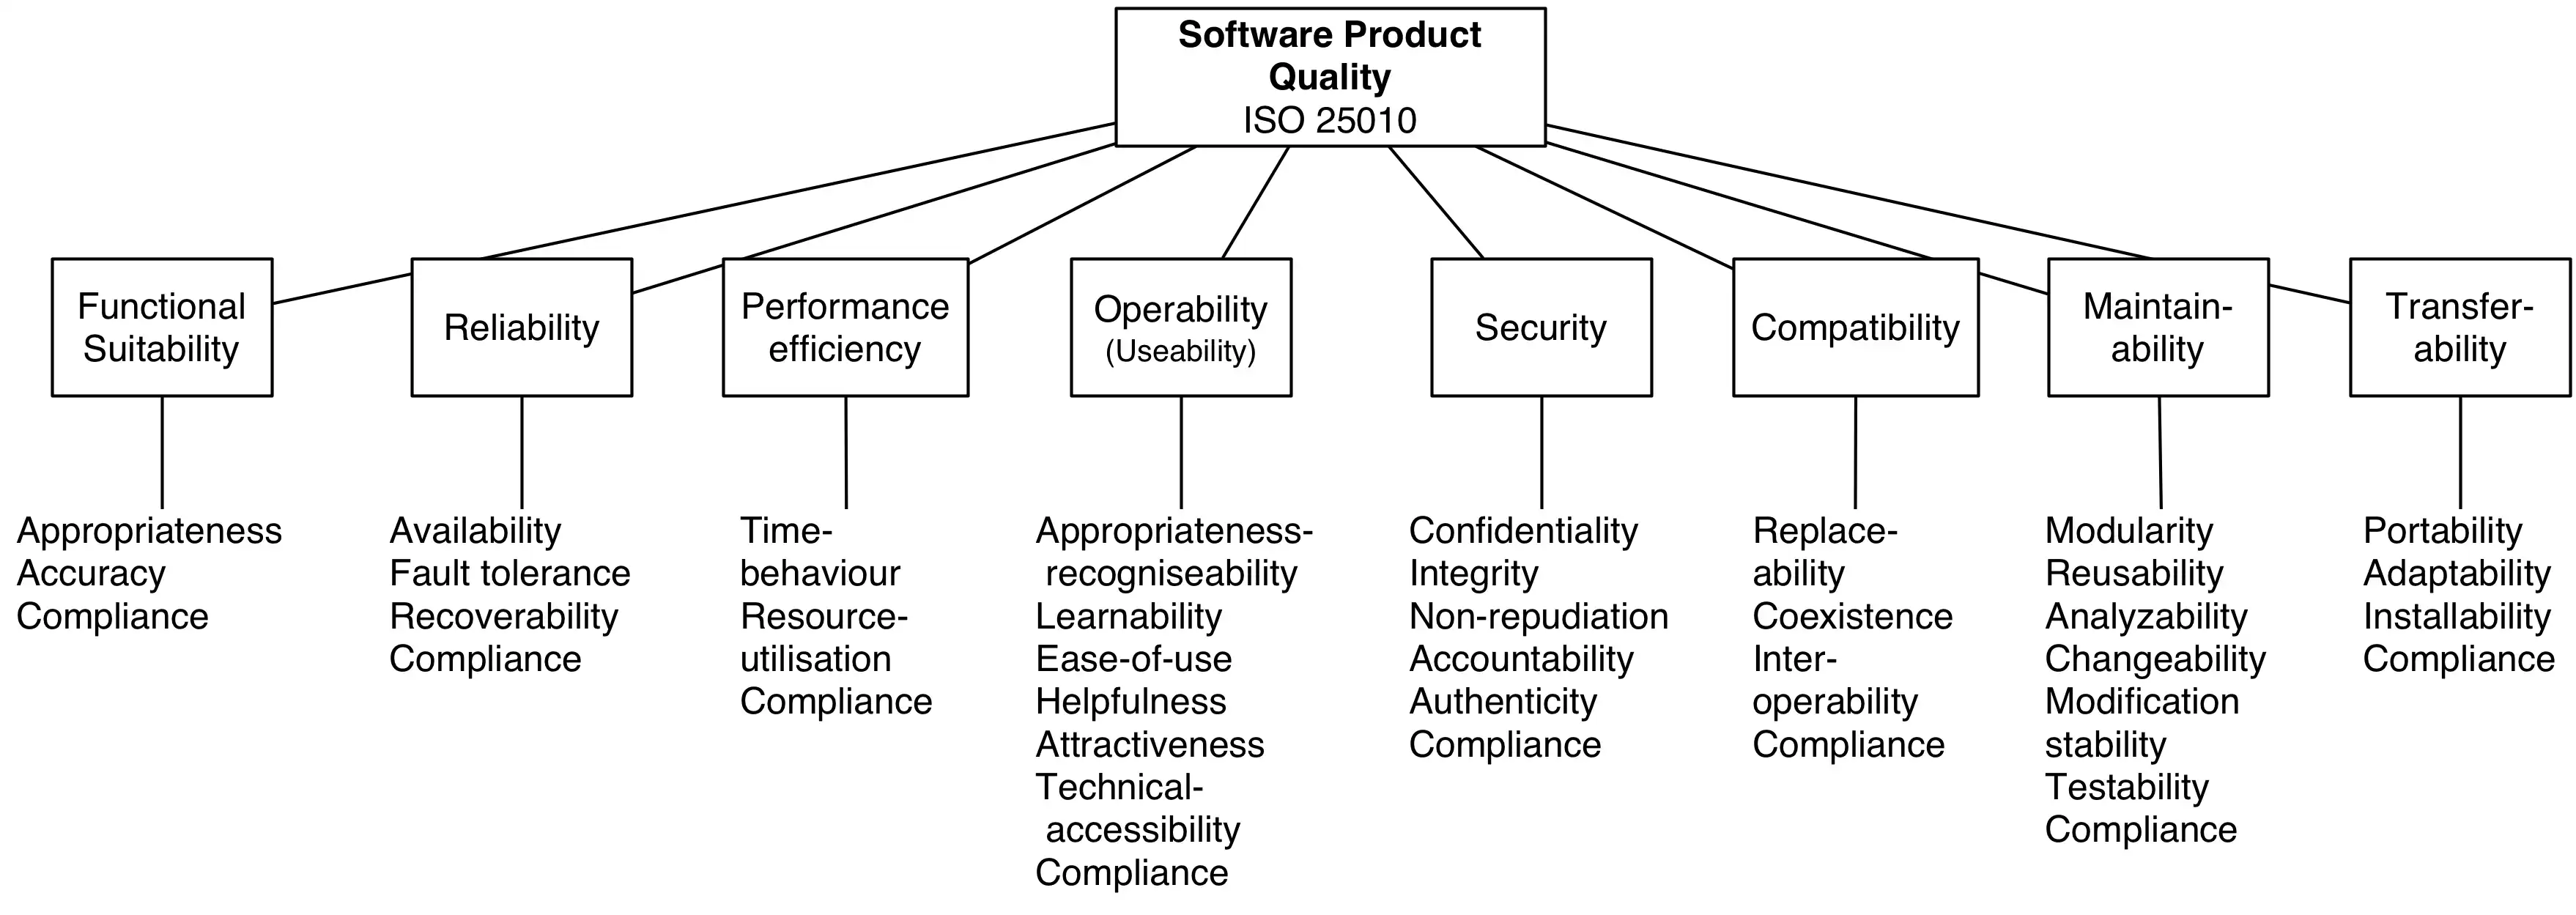 Software Product Quality - ISO standard 25010 - hierarchical representation